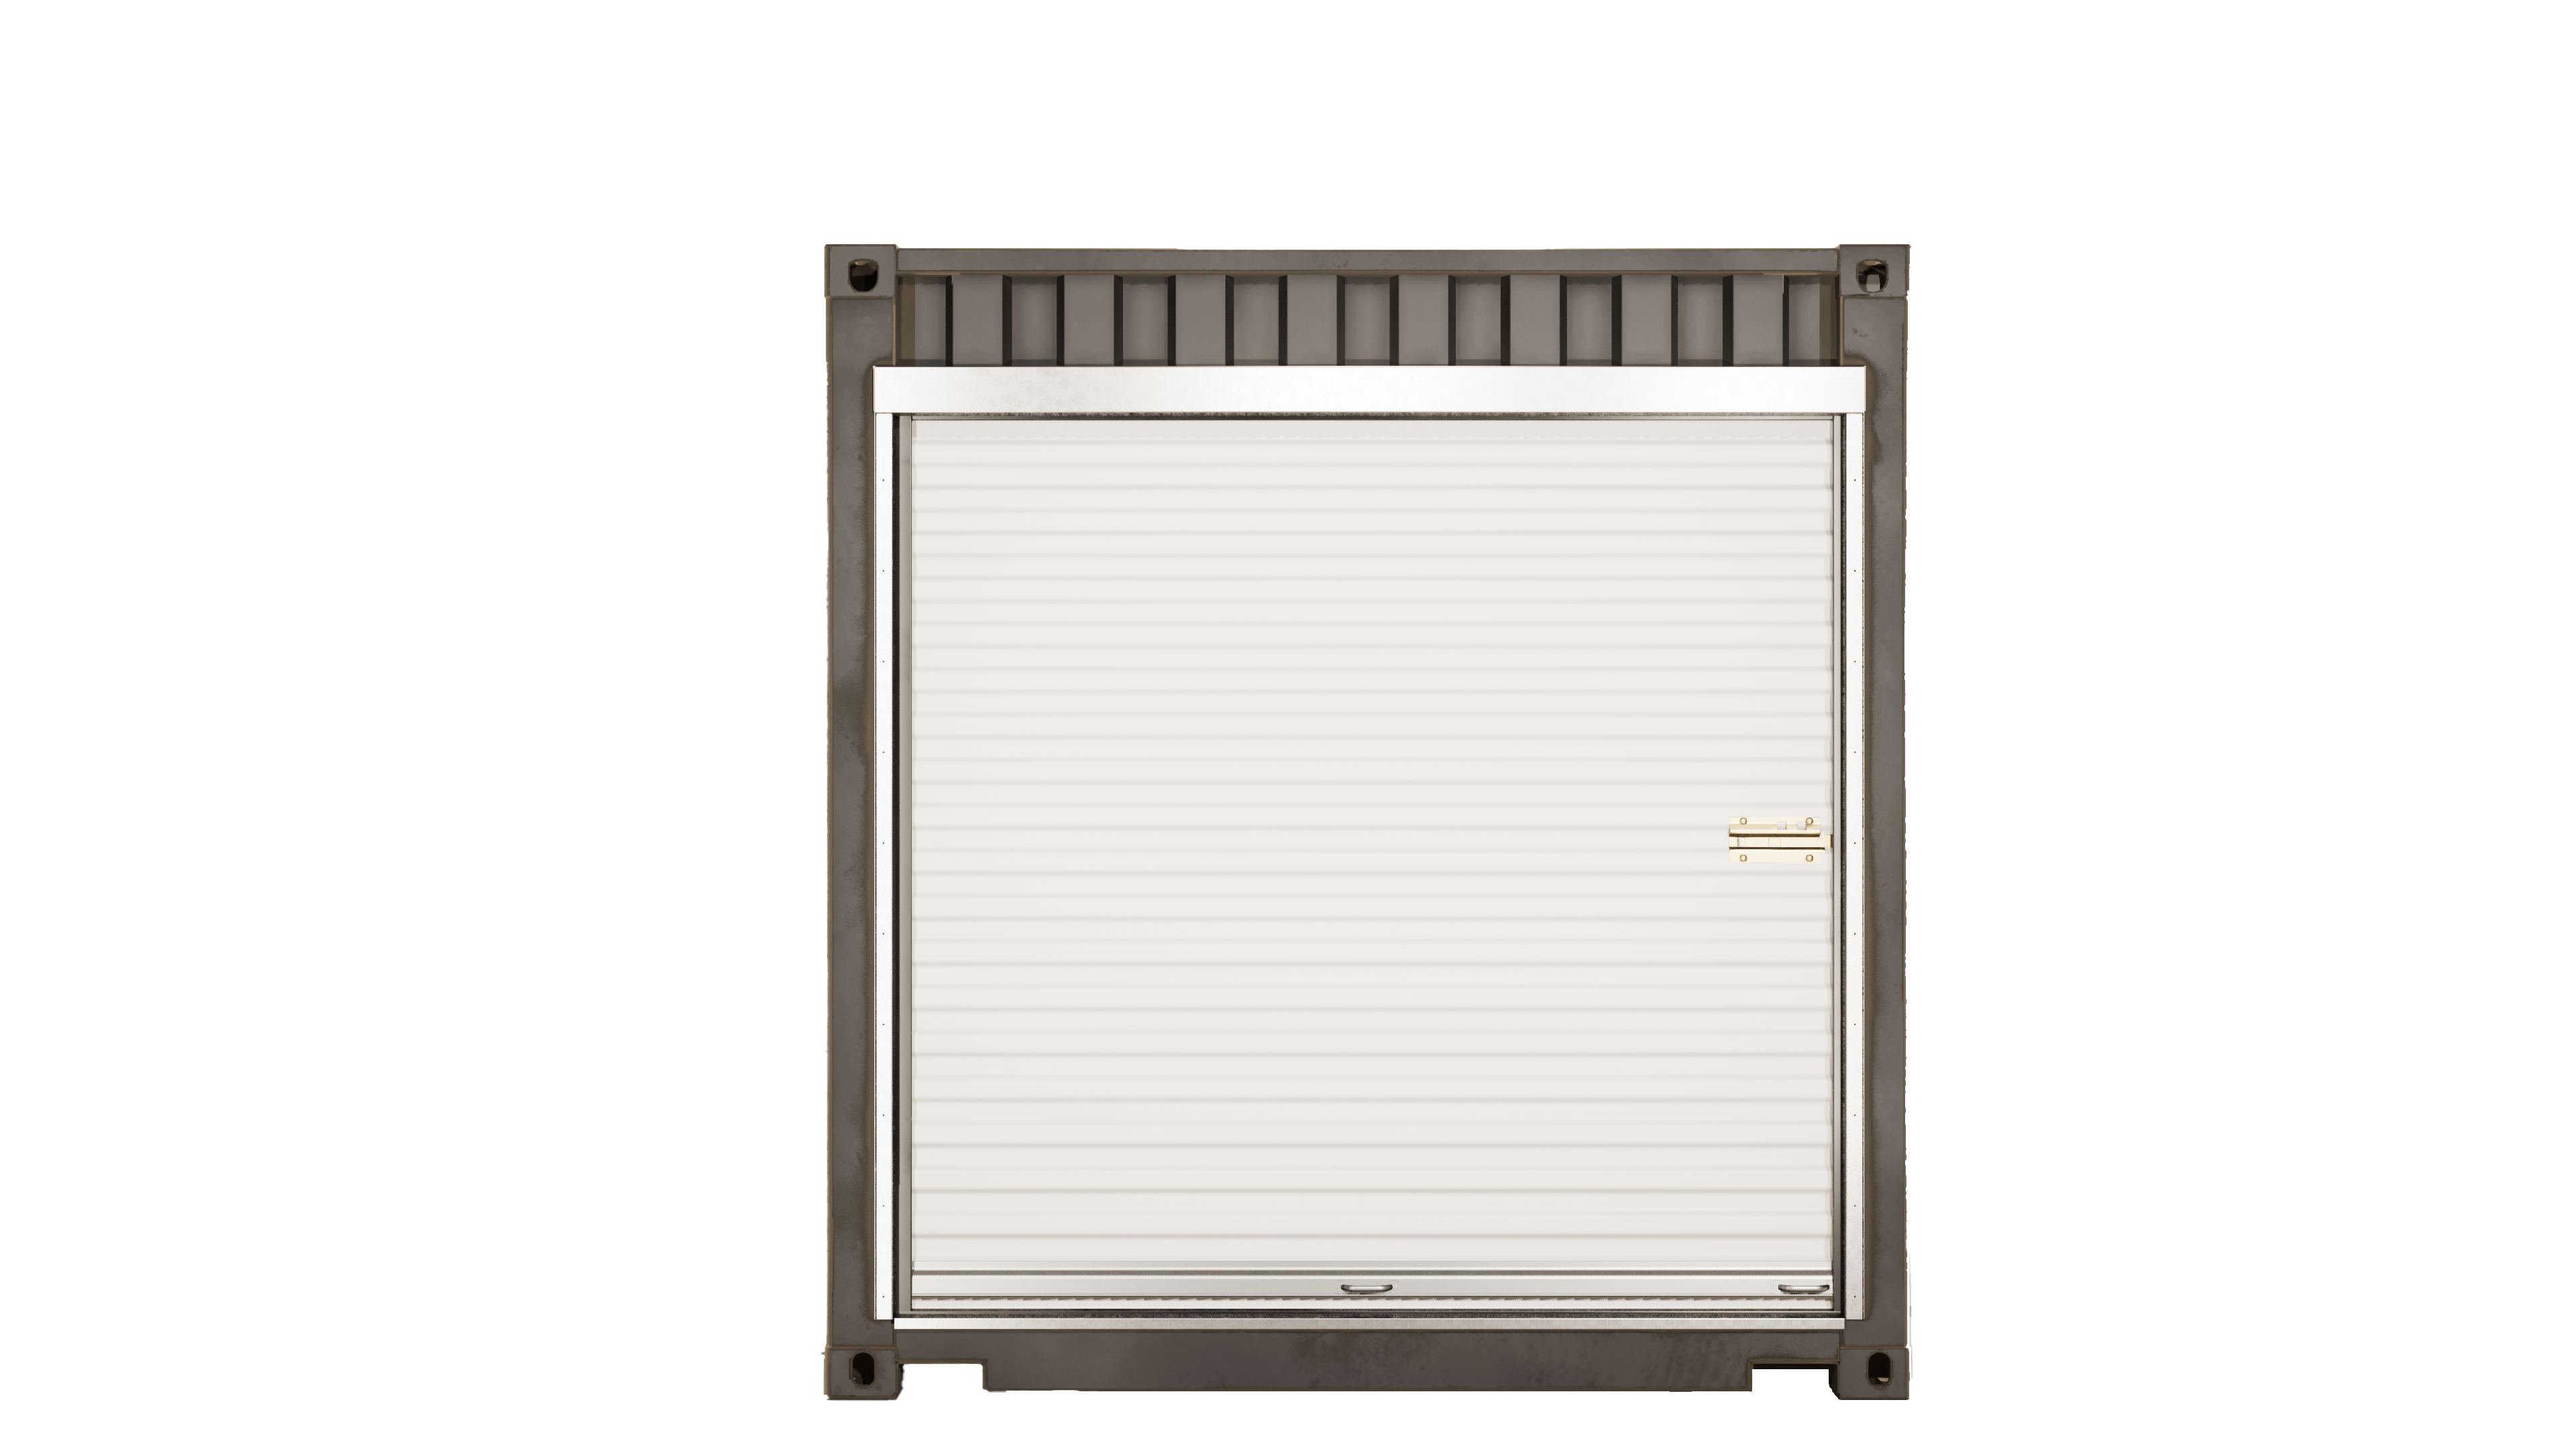 Standard (8'6" Tall) End Wall Galvanized RUD Framing Kit (7' x 6'8") - Door Not Included (Please contact us before placing order so we can provide accurate shipping quote)